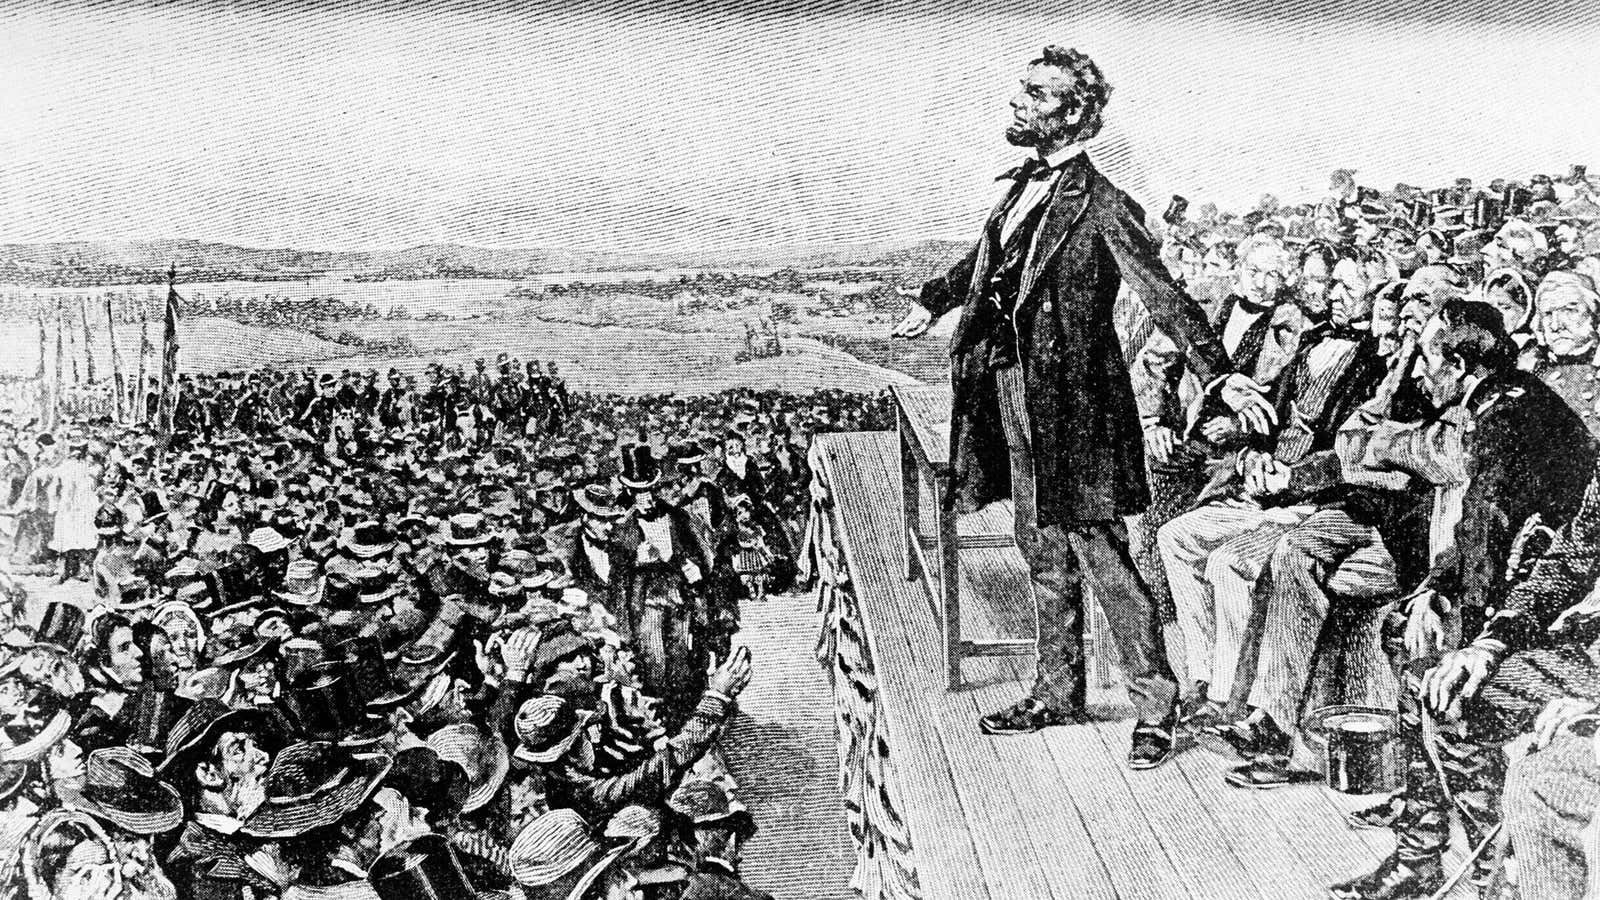 This undated illustration depicts President Abraham Lincoln making his Gettysburg Address at the dedication of the Gettysburg National Cemetery on the battlefield at Gettysburg, Pa.,…